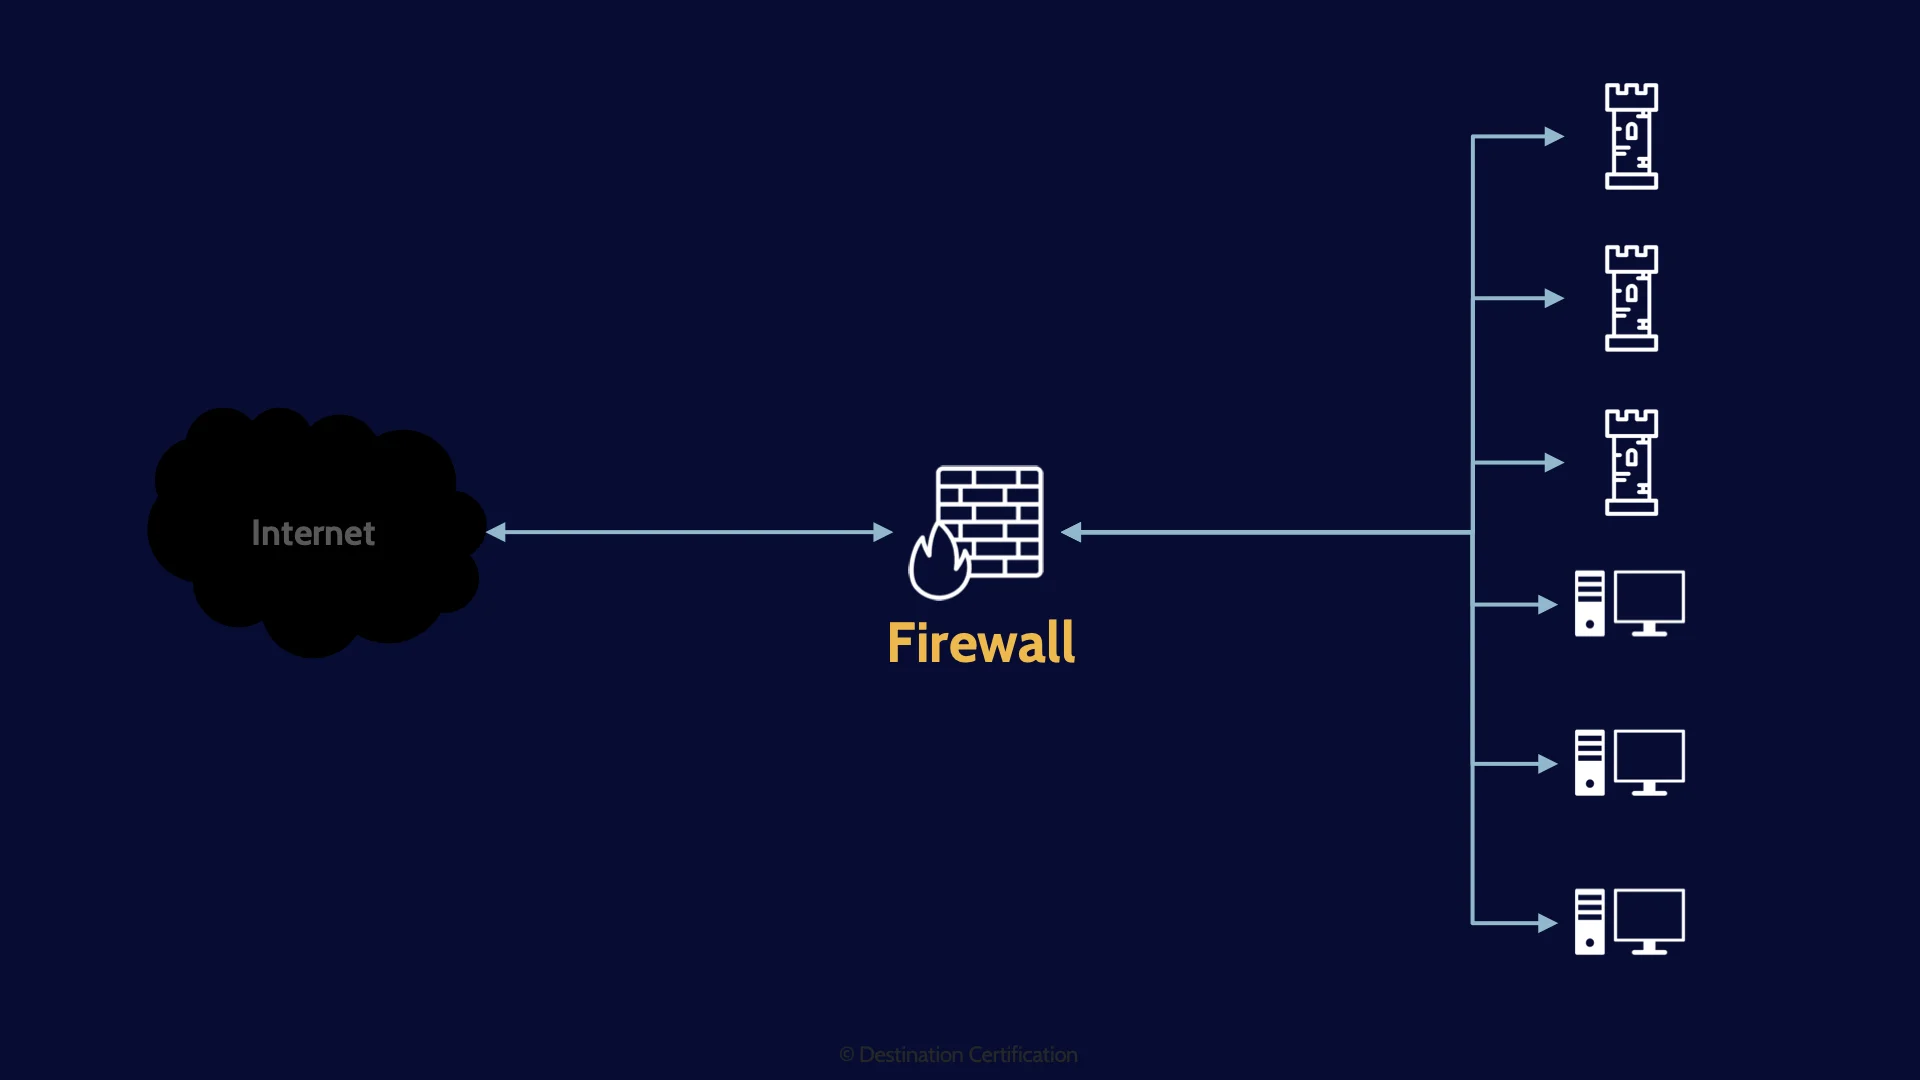 Image of firewall that is between internet and our systems - Destination Certification